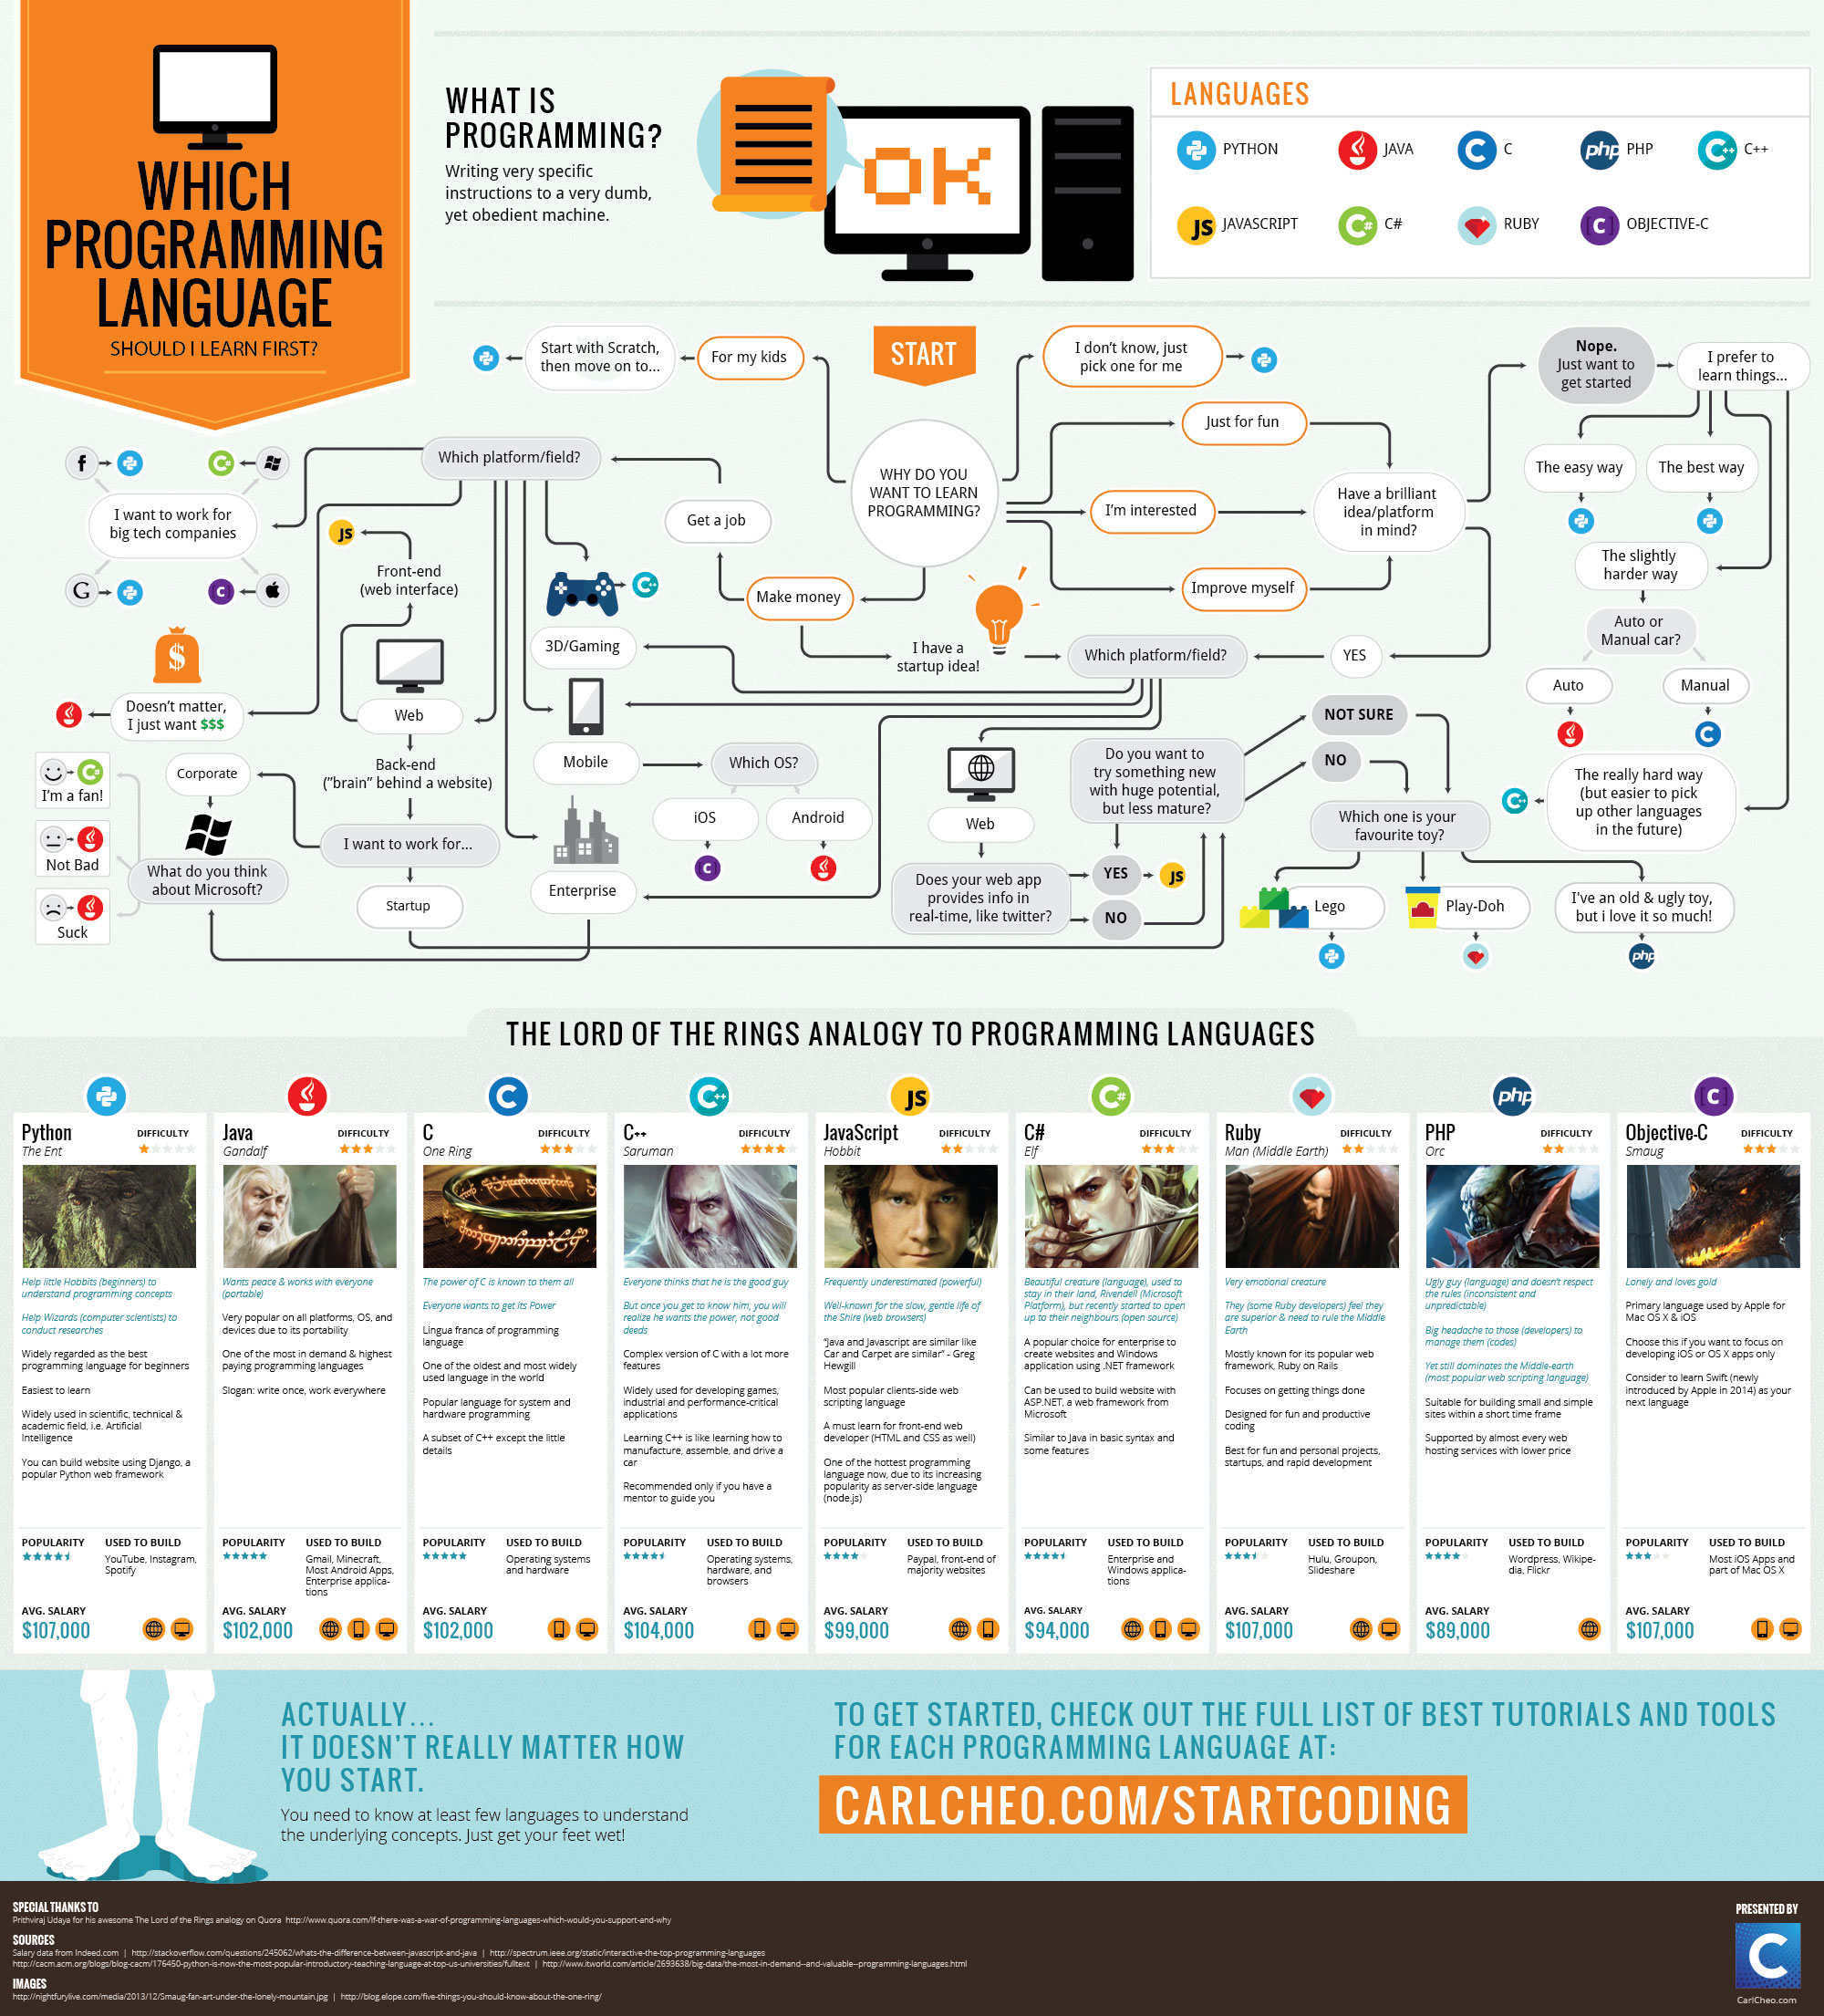 Which programming language should I learn first? (Infographic)